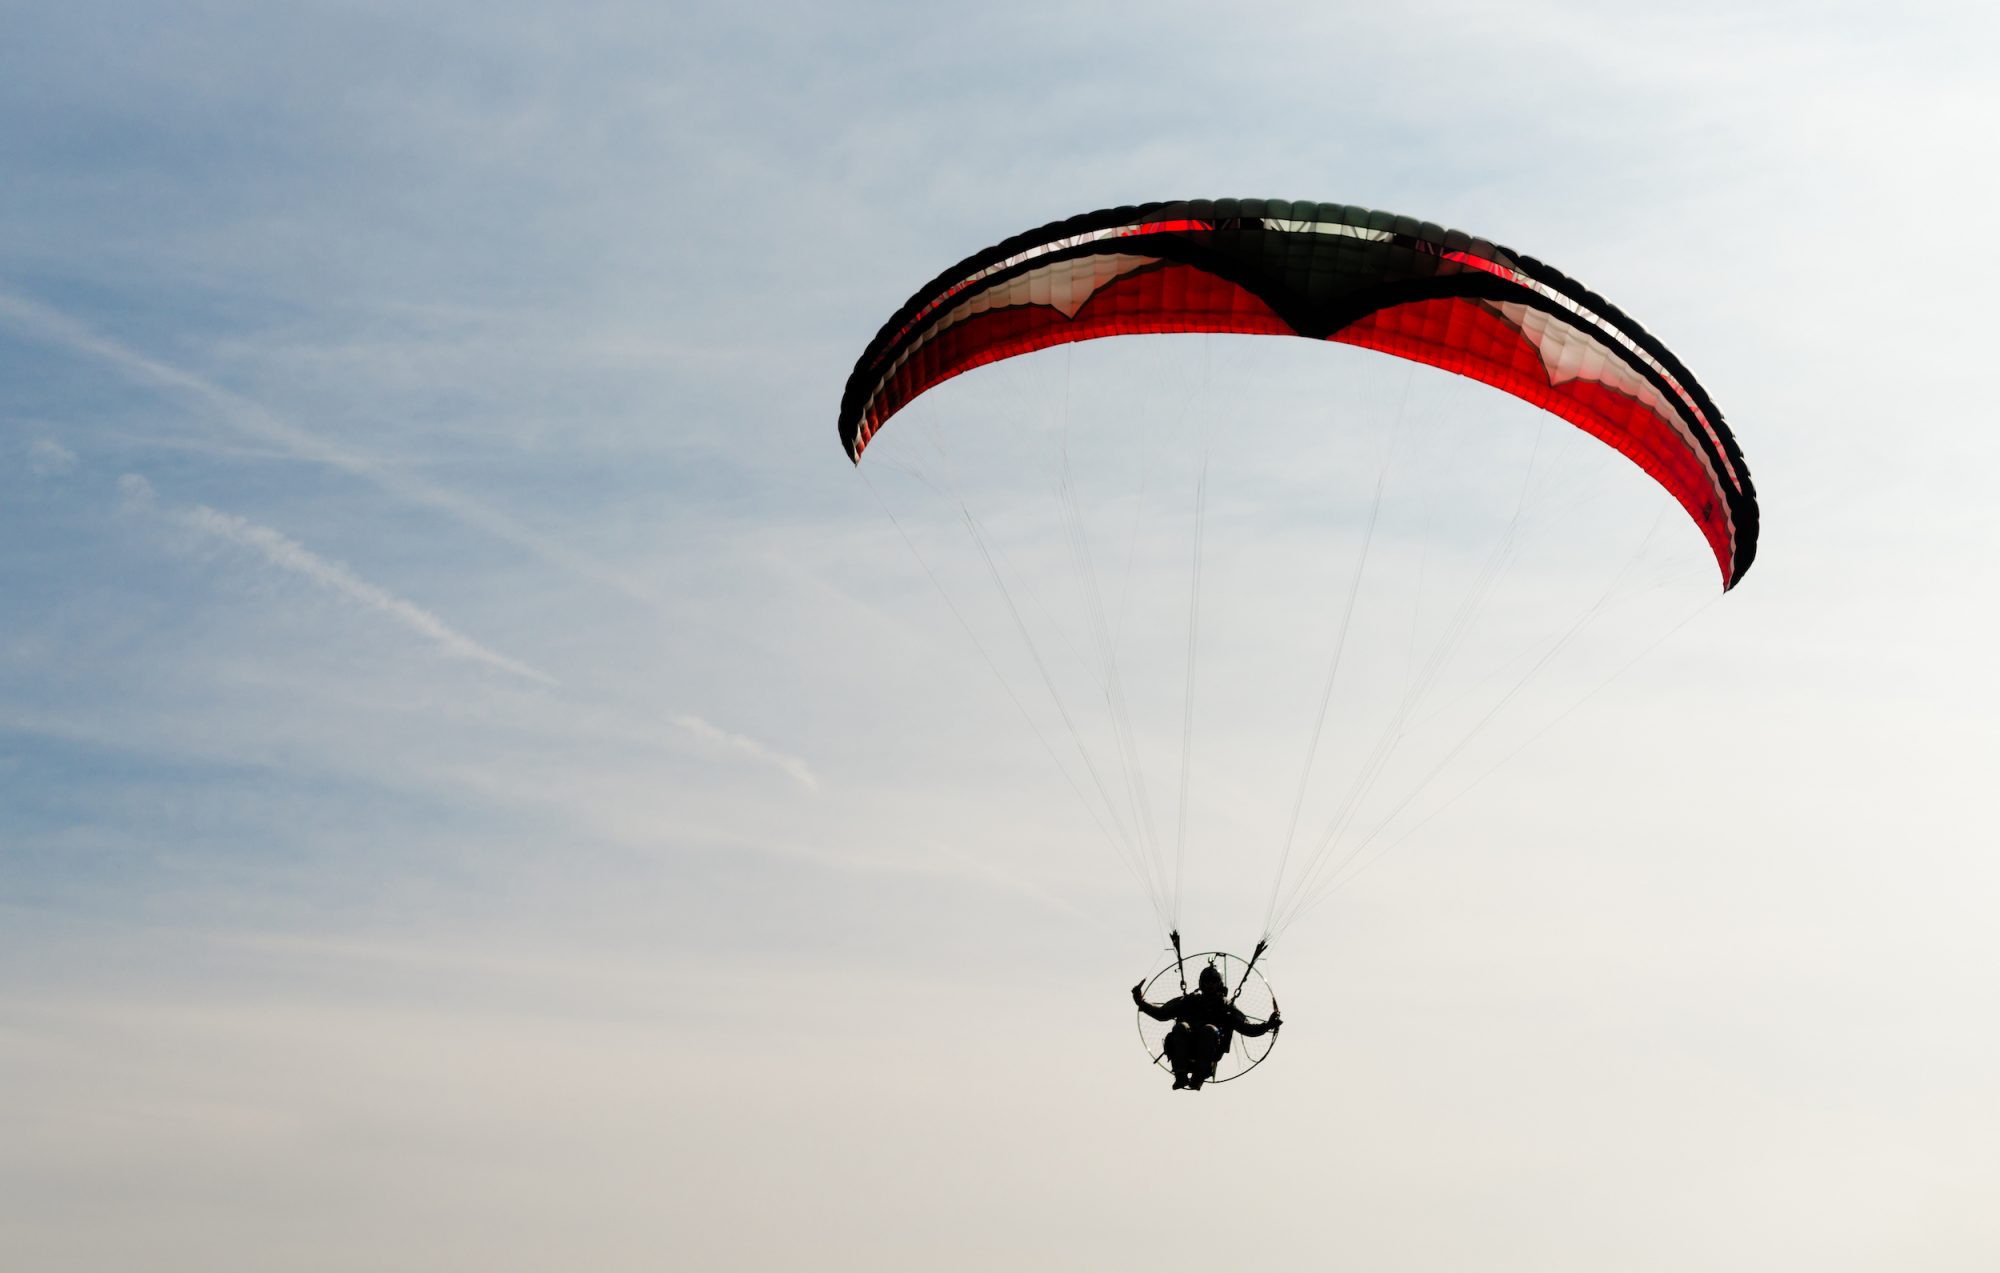 Qatar Ranks Second in FAI Classification of Paramotor Competitions